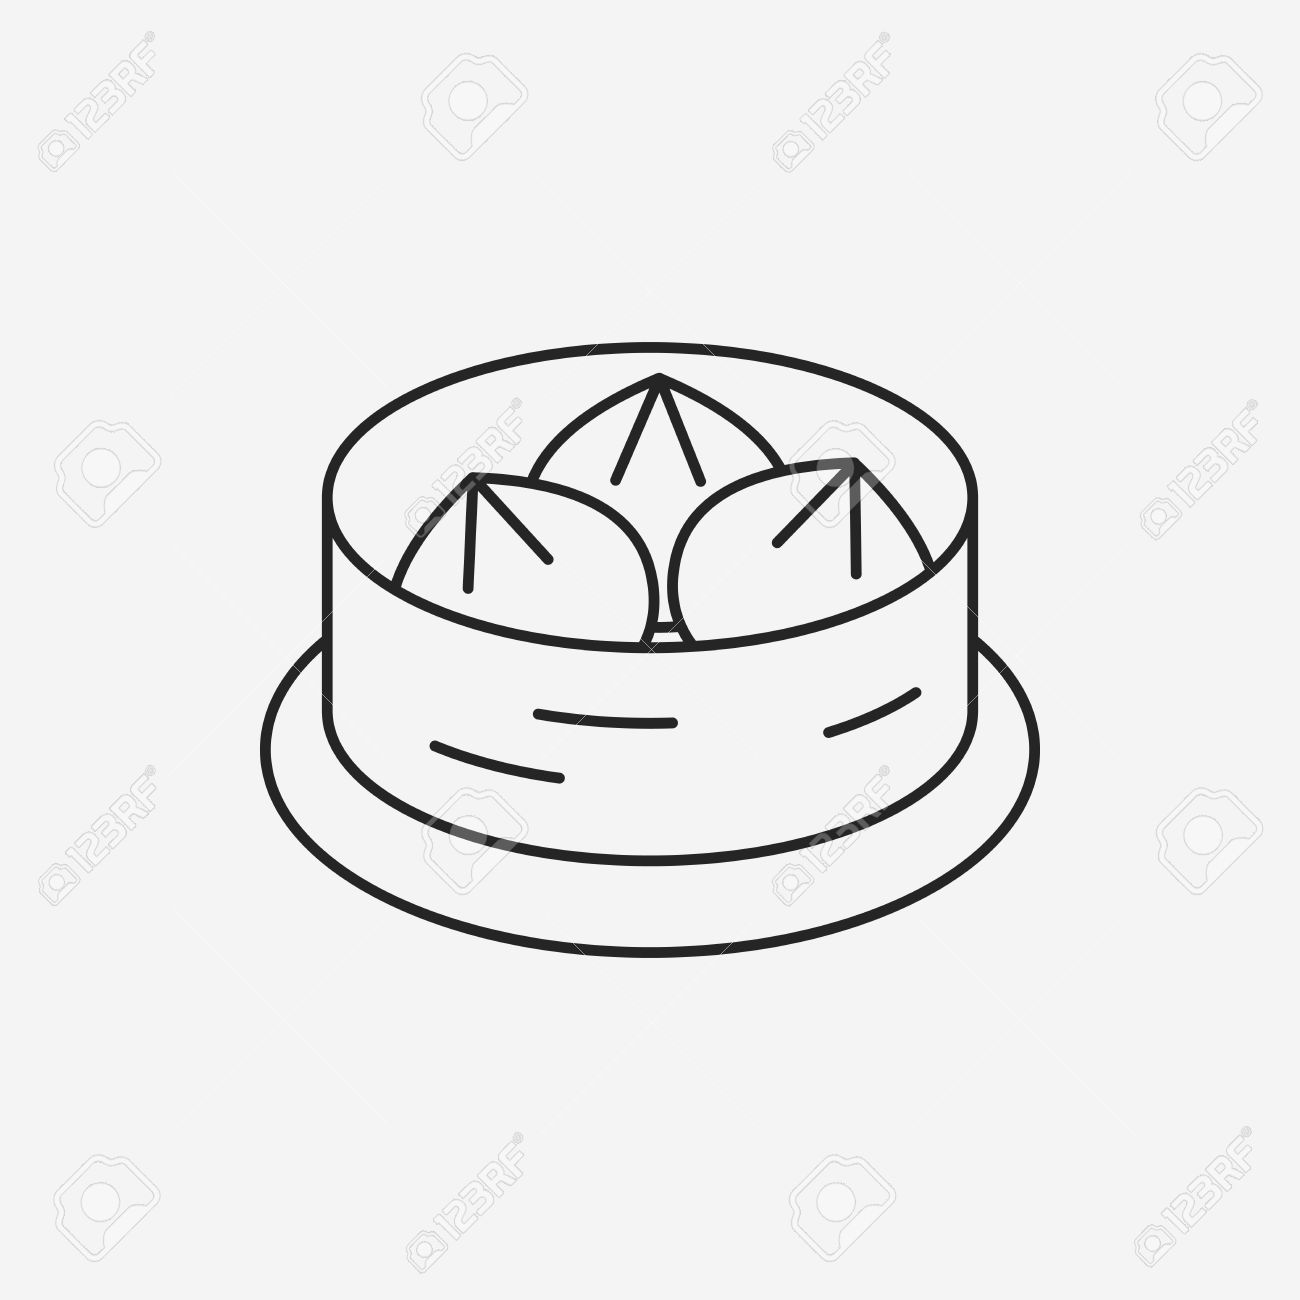 Steamed Stuffed Bun Line Icon Royalty Free Cliparts, Vectors, And.